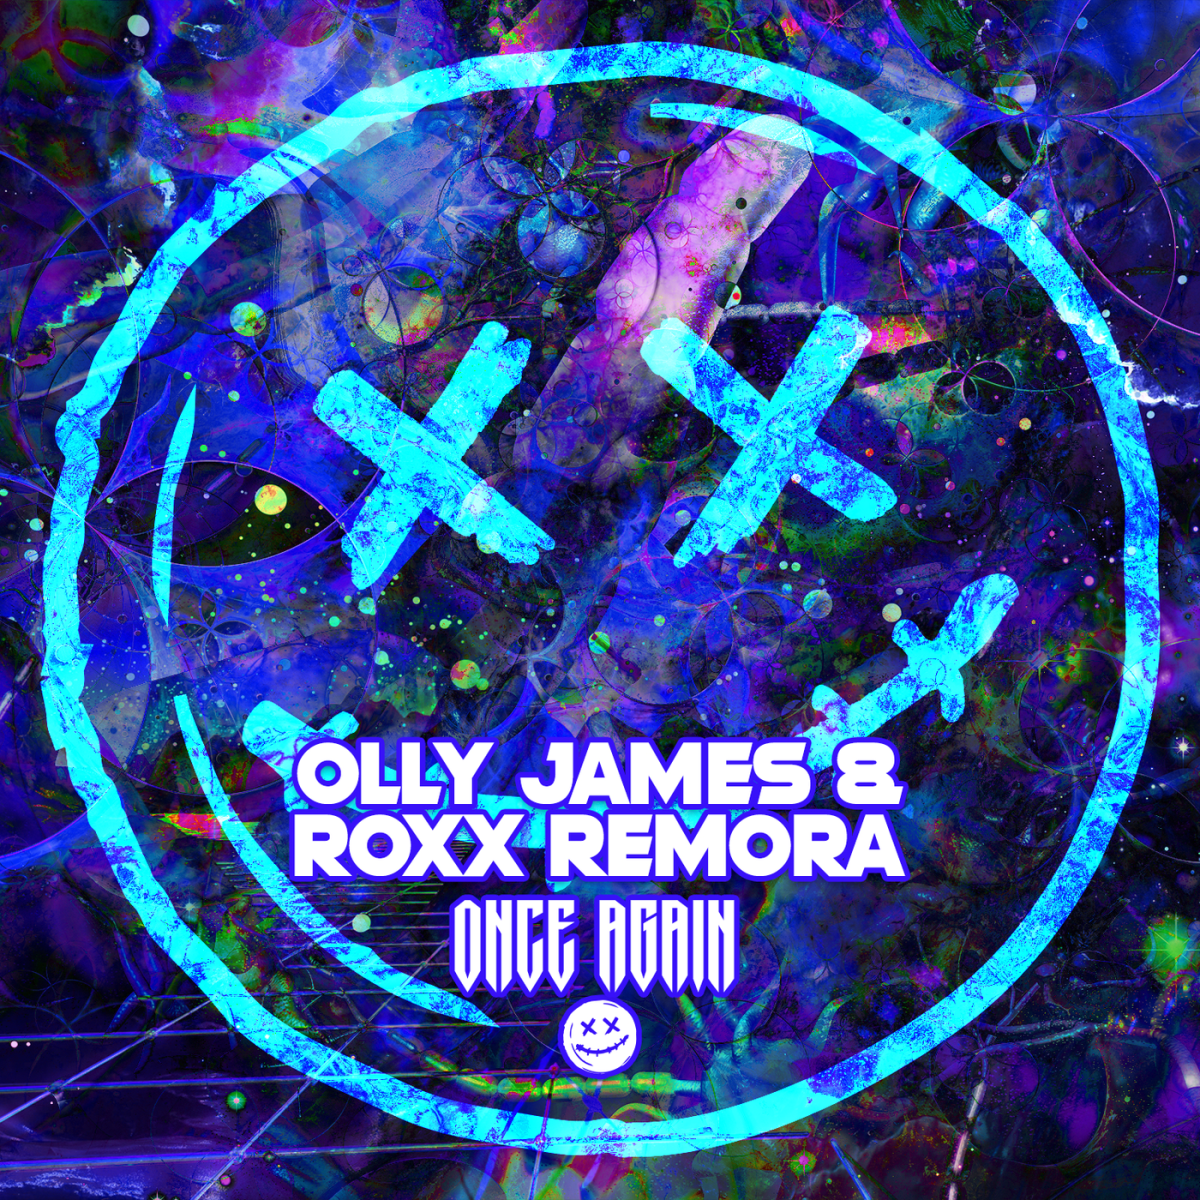 Once Again - Olly James⁠ & Roxx Remora⁠